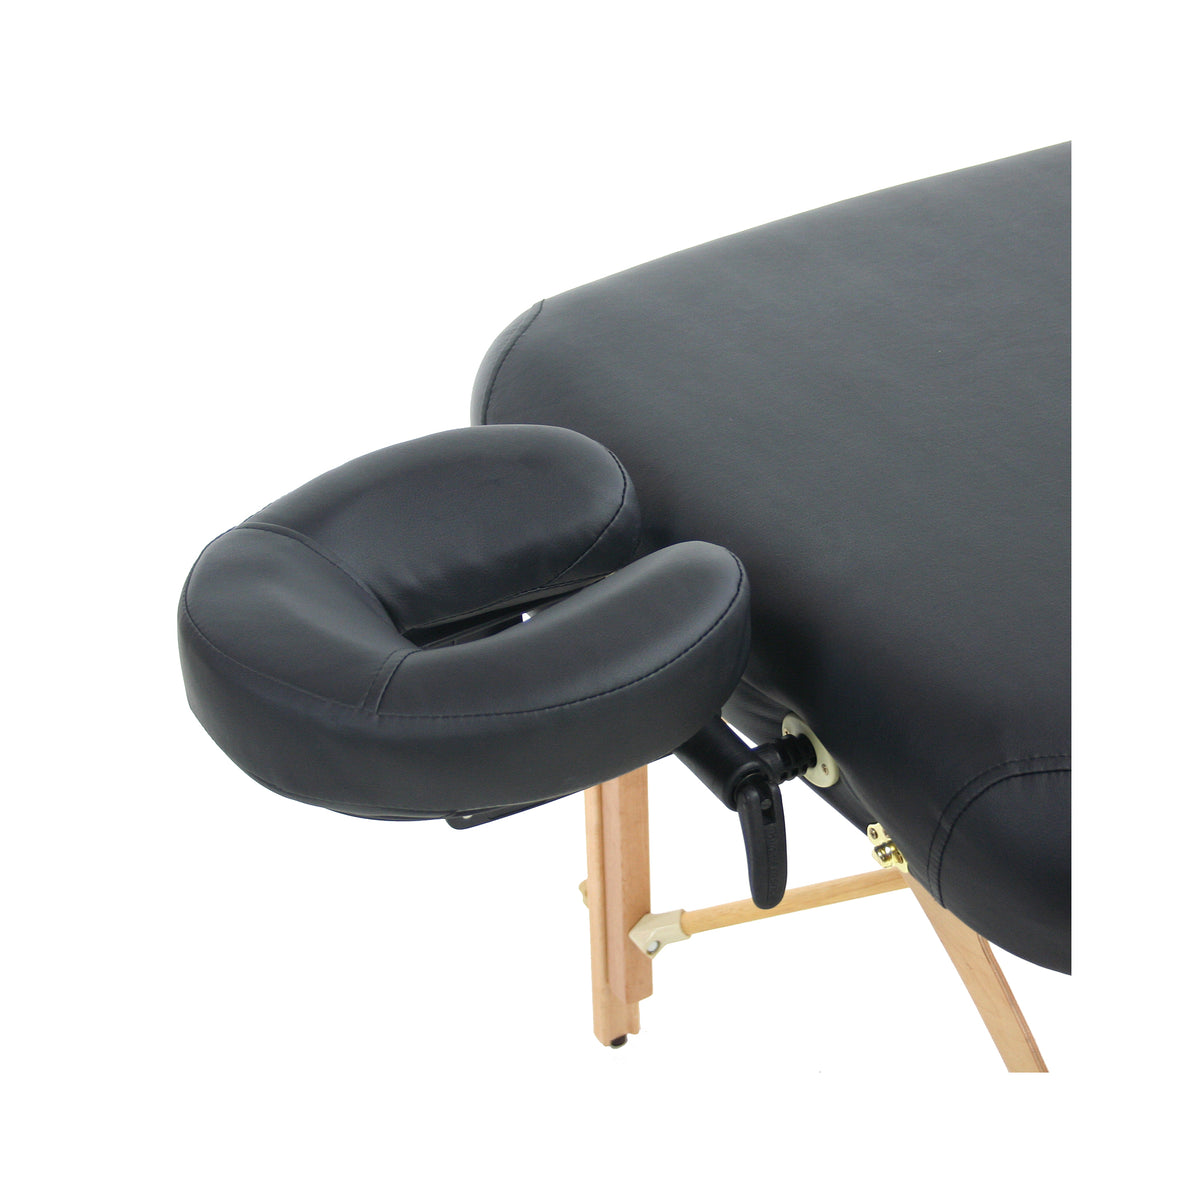 Touch America - Master Bodyworker Portable Massage Table 30&quot; 5 year Warranty - Superb Massage Tables